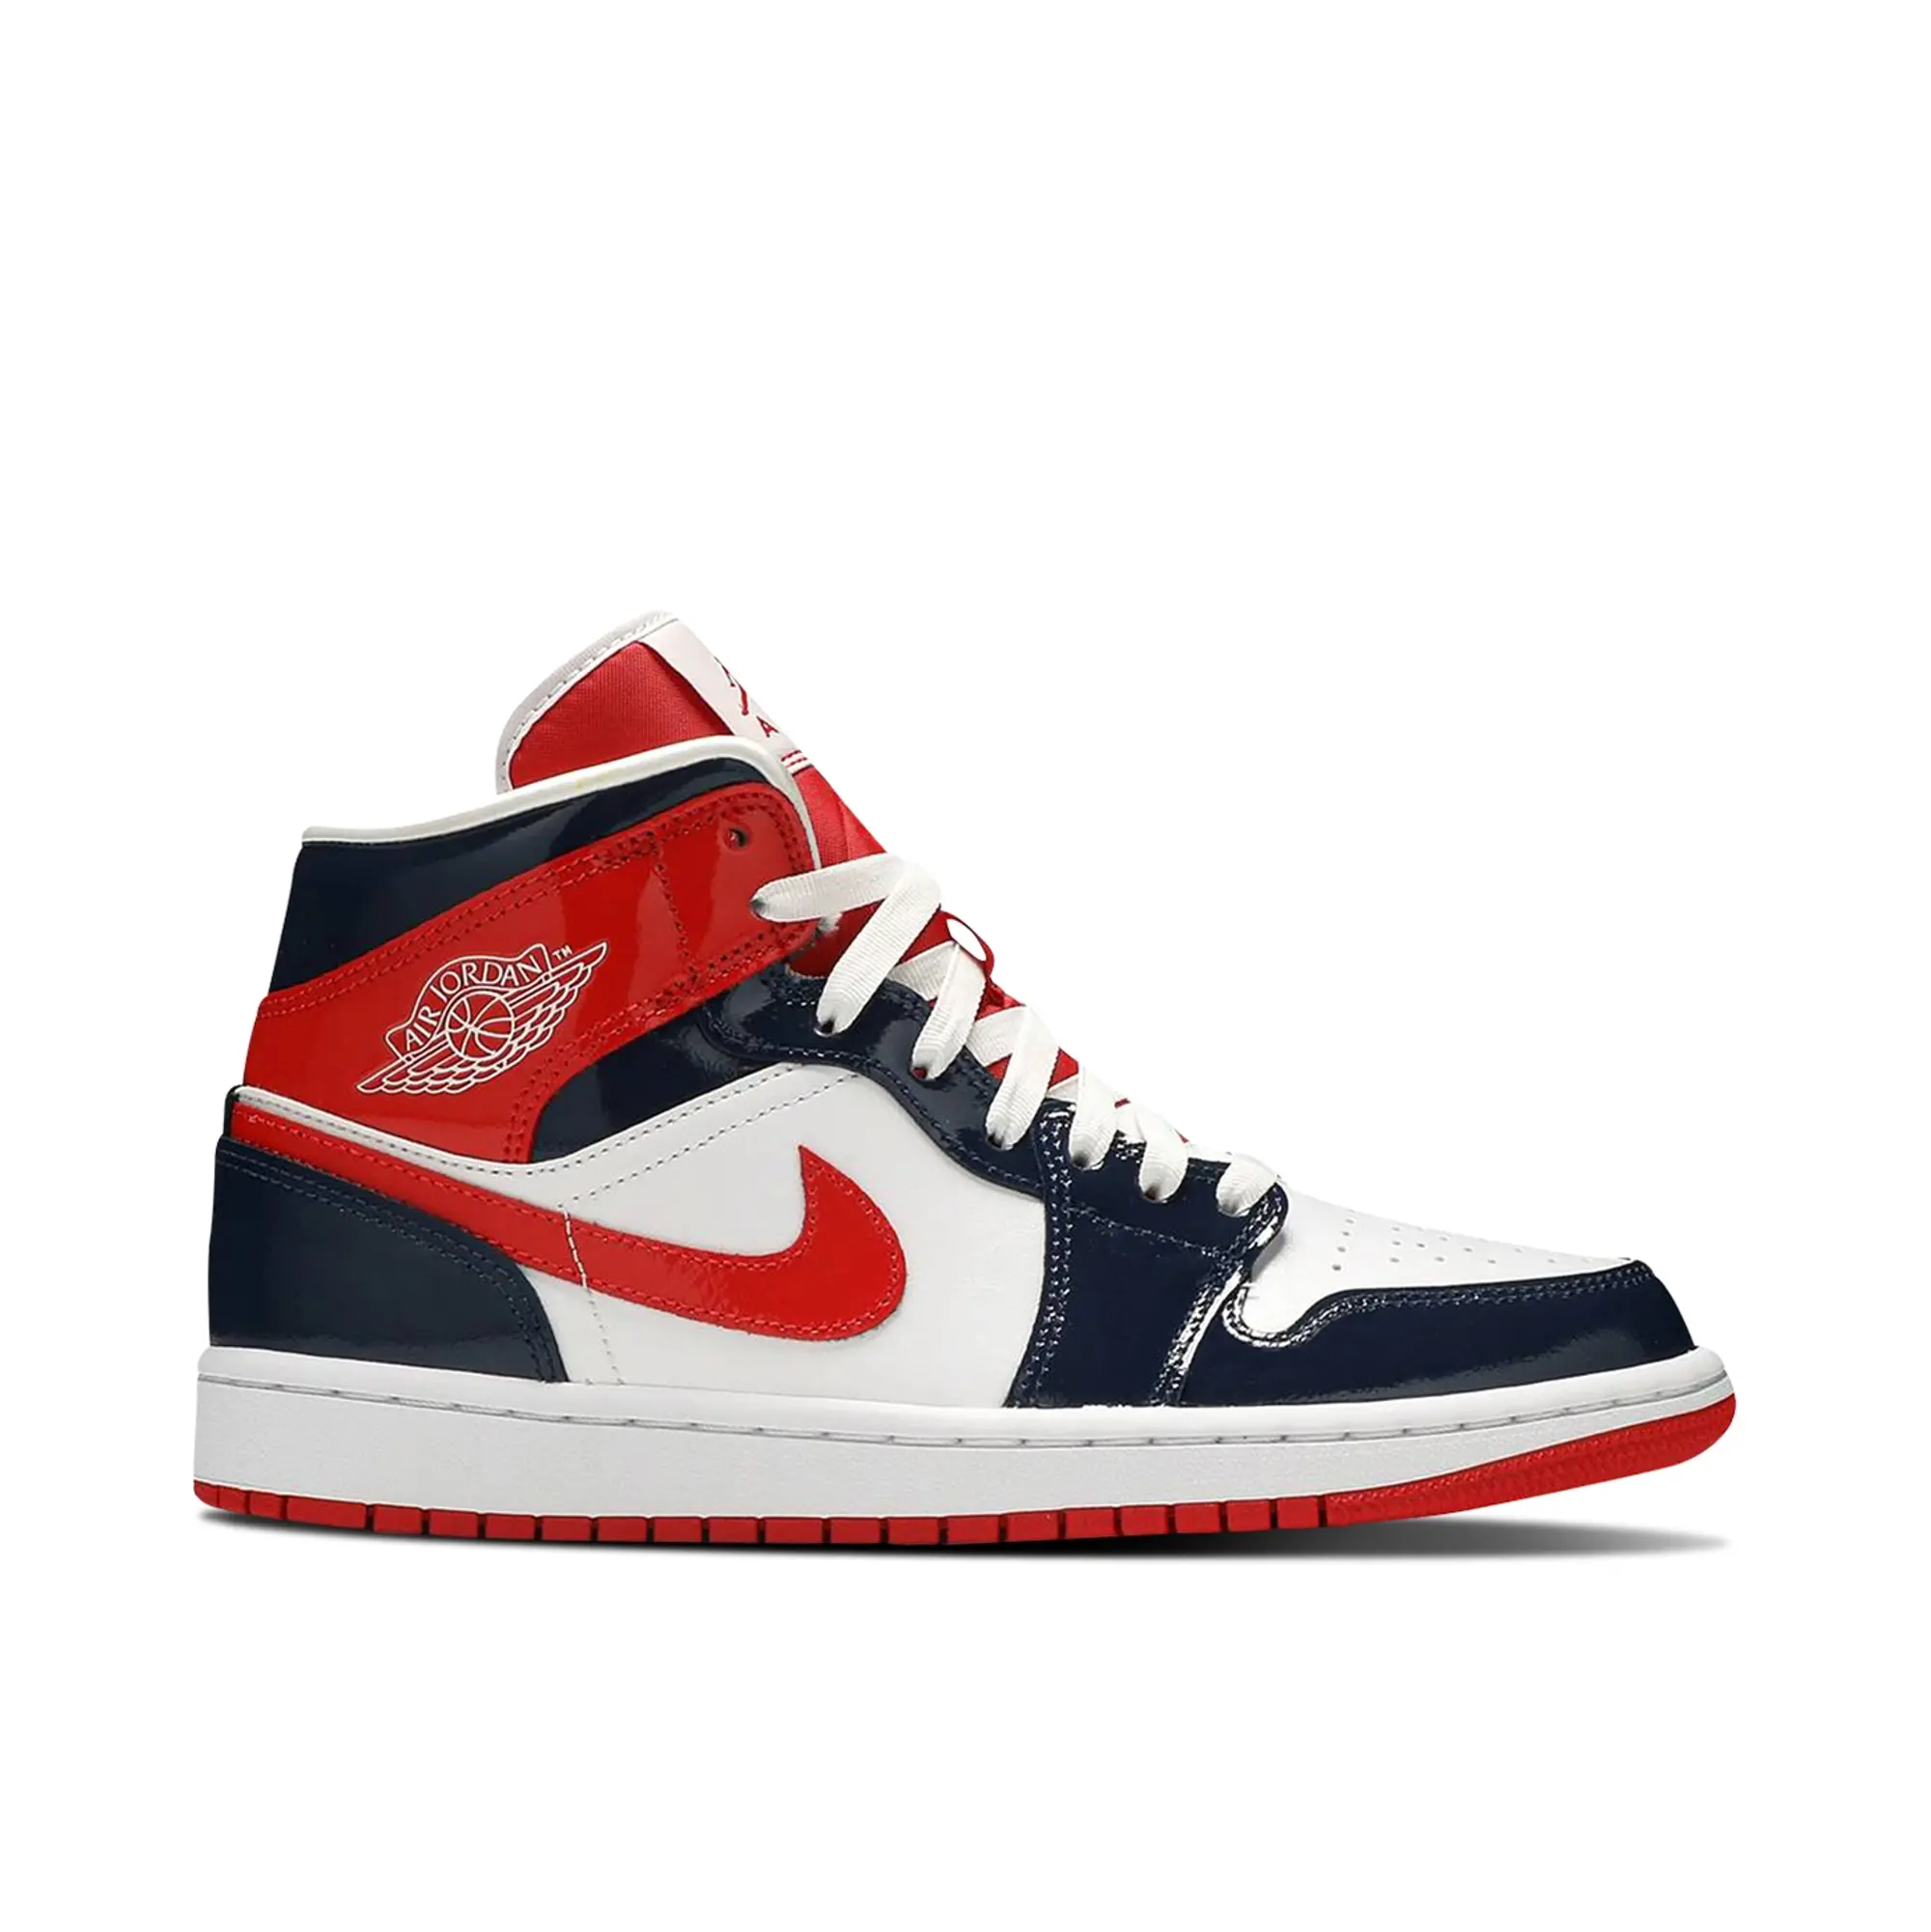 Nike Womens Air Jordan 1 Mid Patent Leather Navy / White / Red Shoes